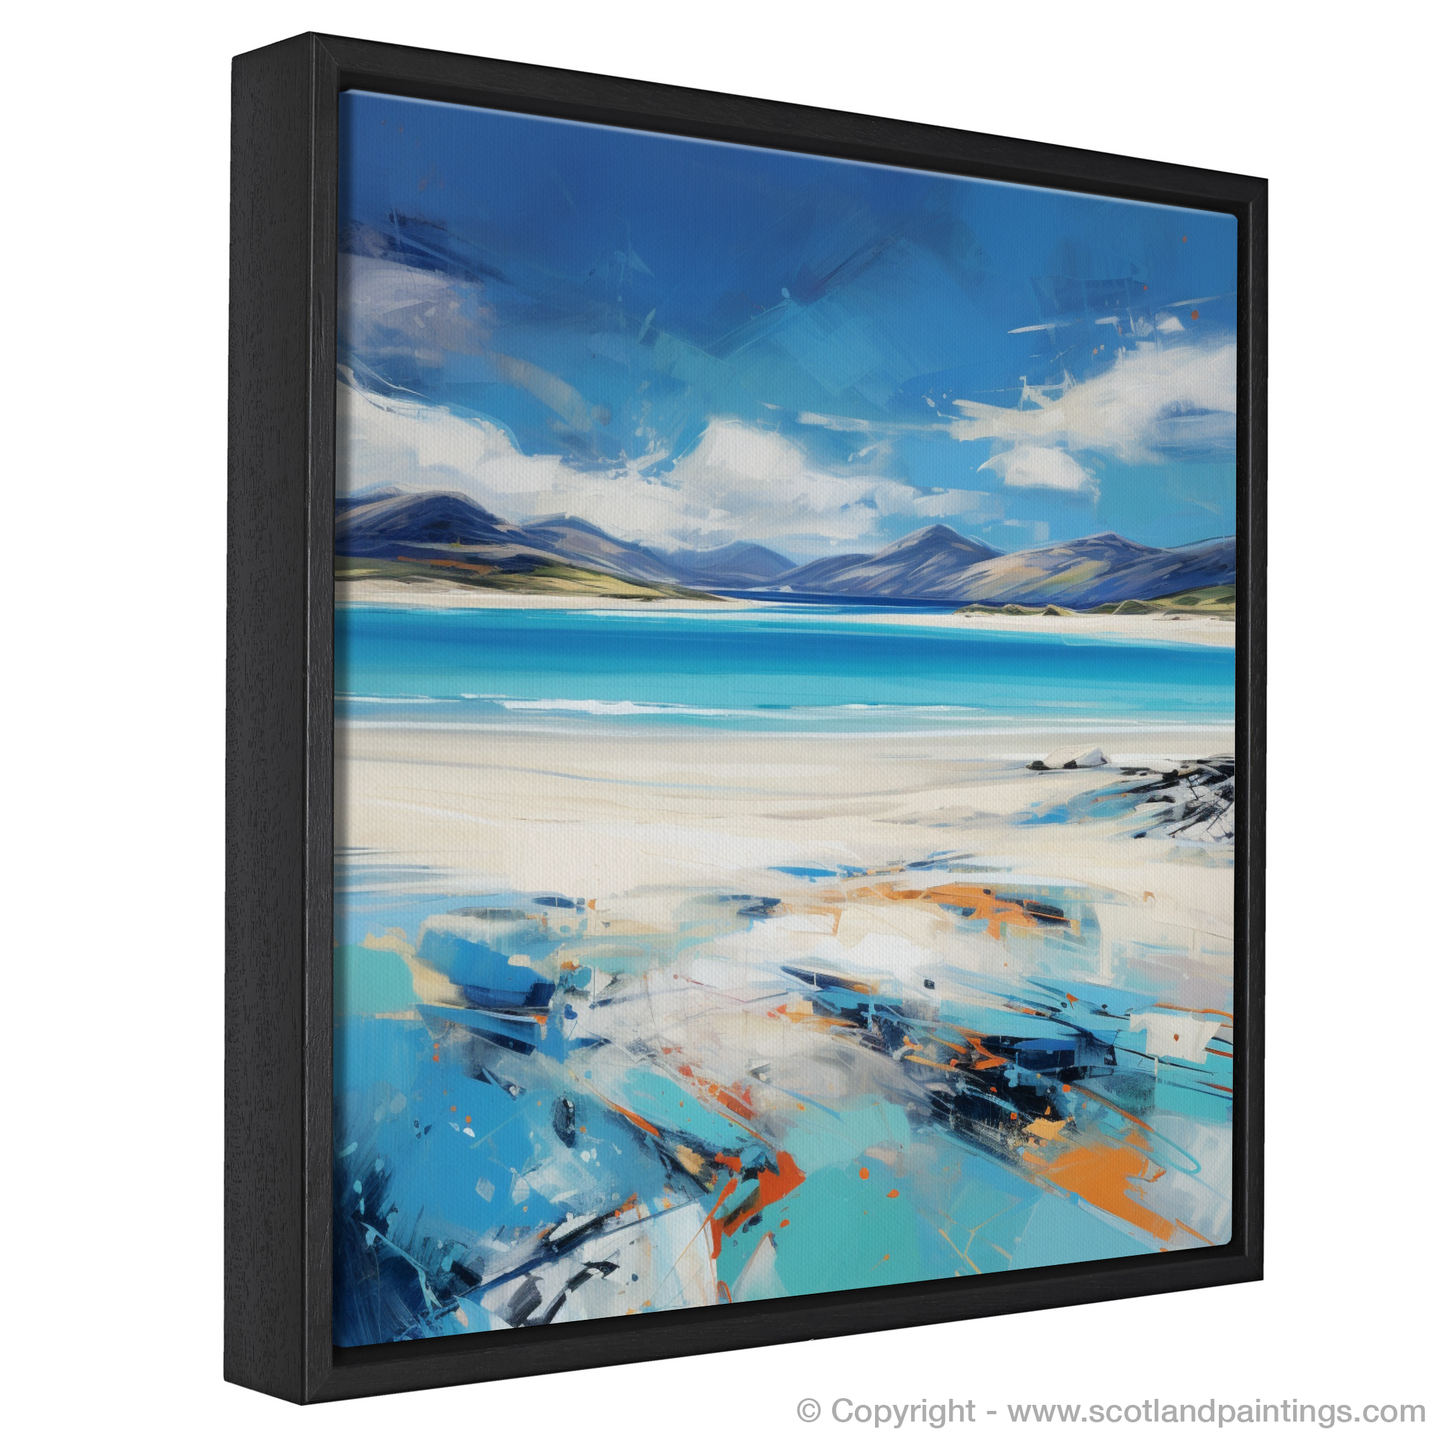 Painting and Art Print of Luskentyre Beach, Isle of Harris entitled "Luskentyre Beach: An Expressionist Ode to Scottish Shores".